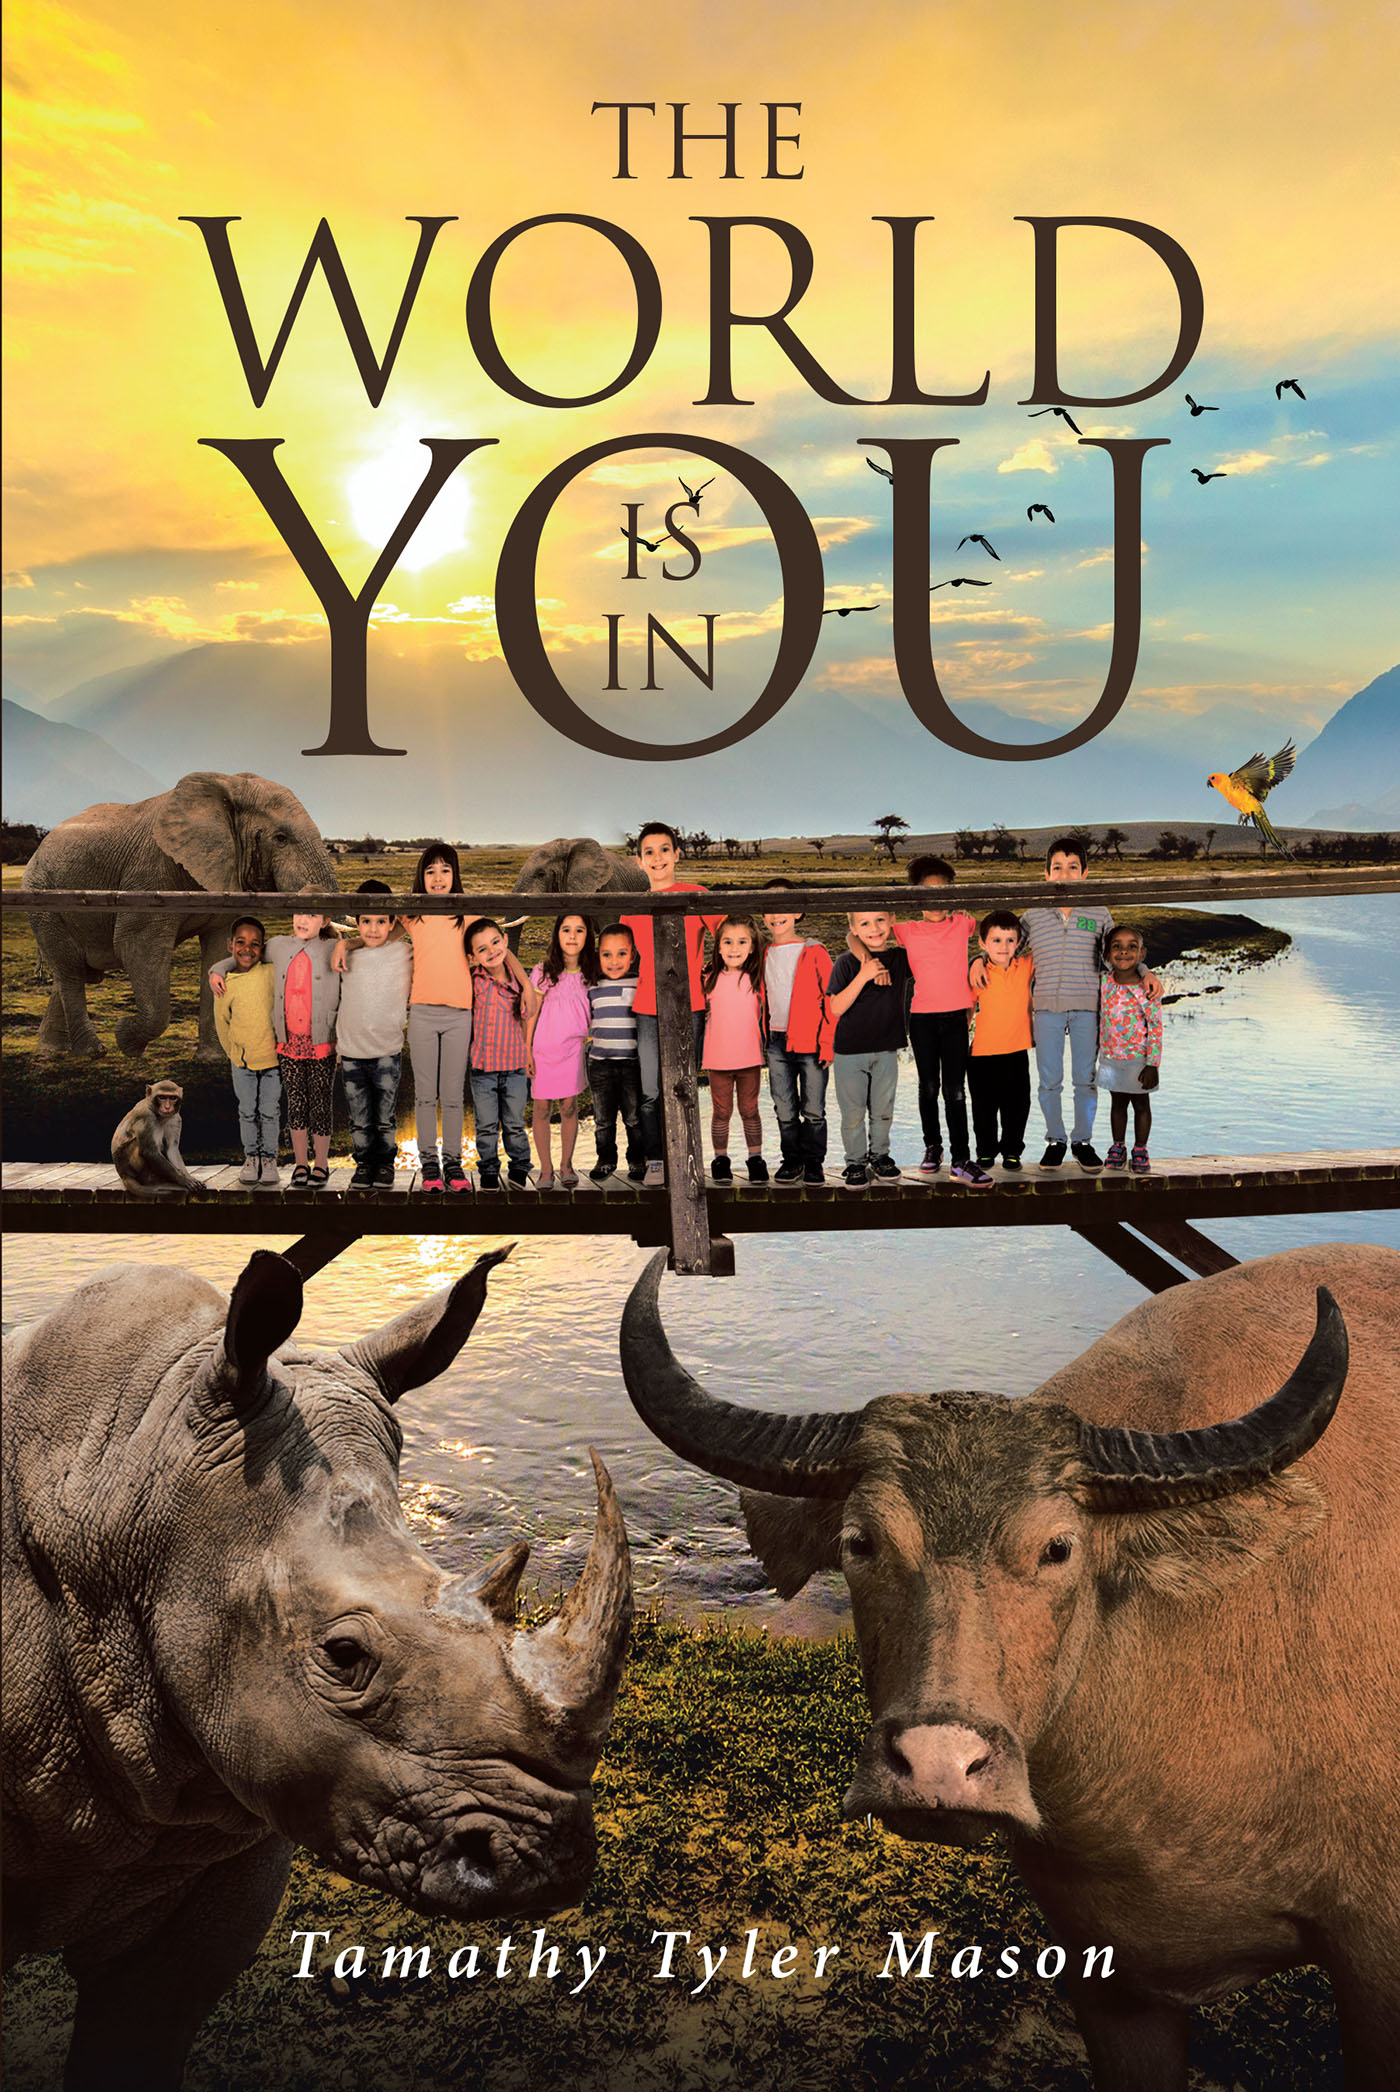 Tamathy Tyler Mason’s Newly Released “The World Is In You” is a Vibrant Collection of Poetry That Will Charm and Inspire